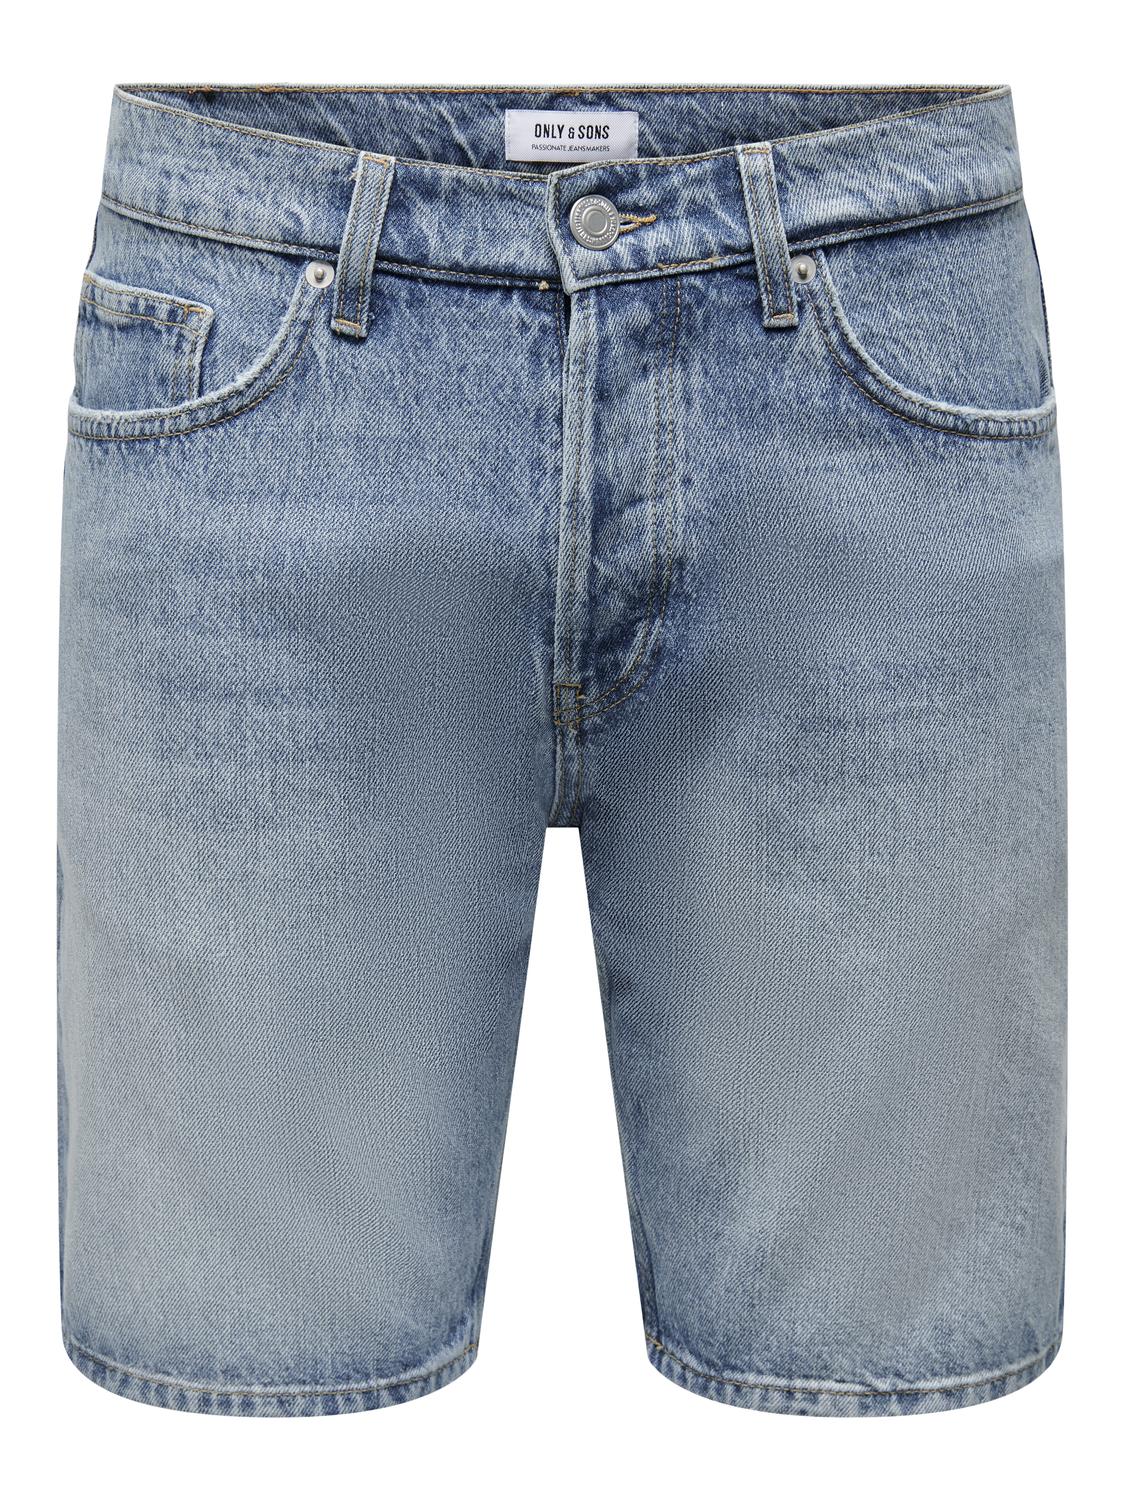 Only & Sons Short EDGE 